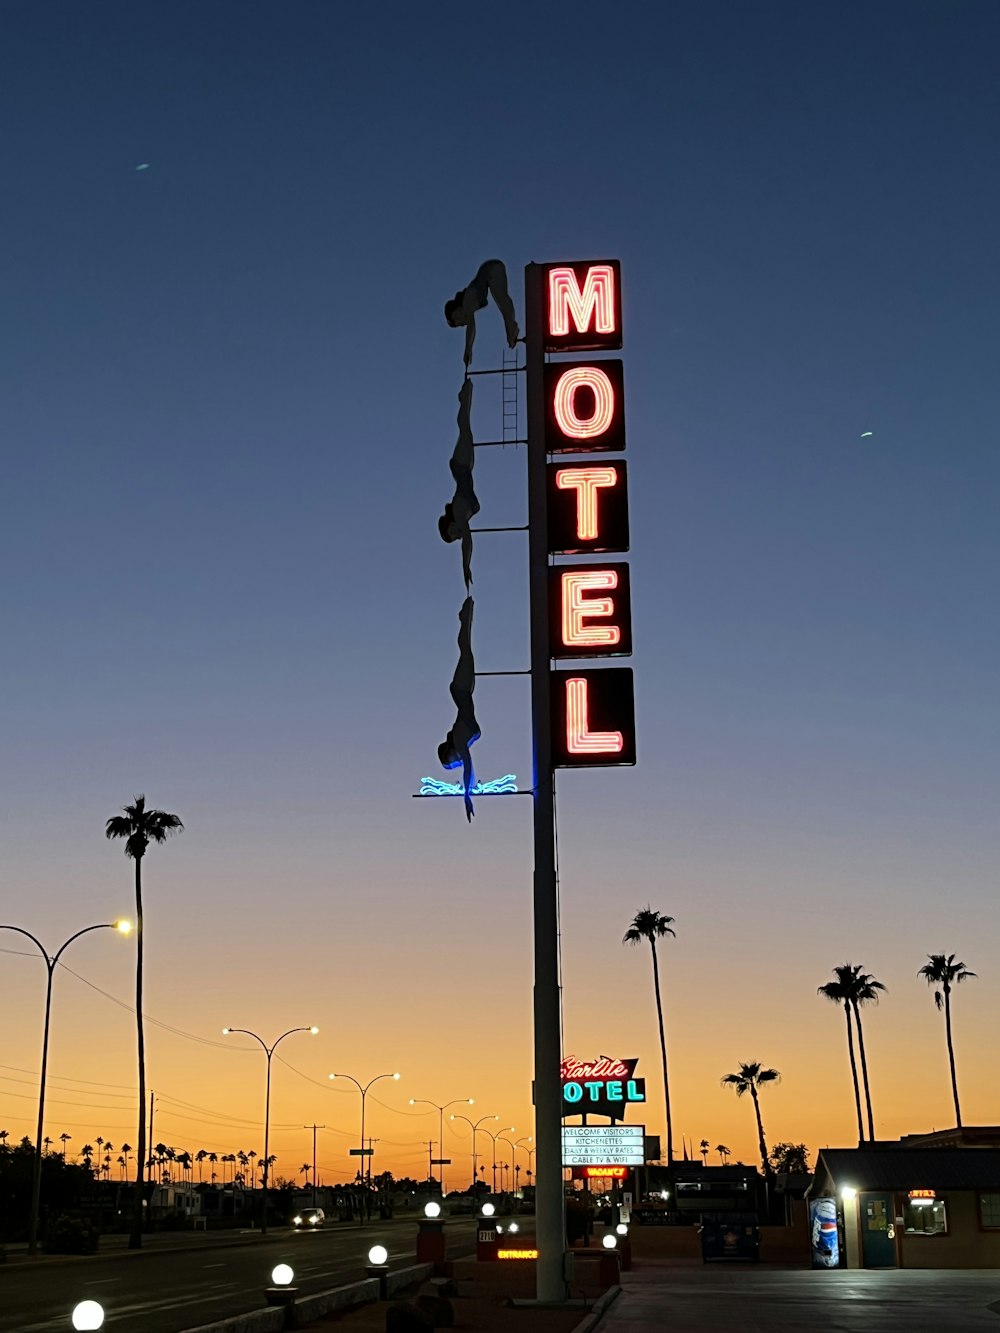 a motel sign at dusk with palm trees in the background